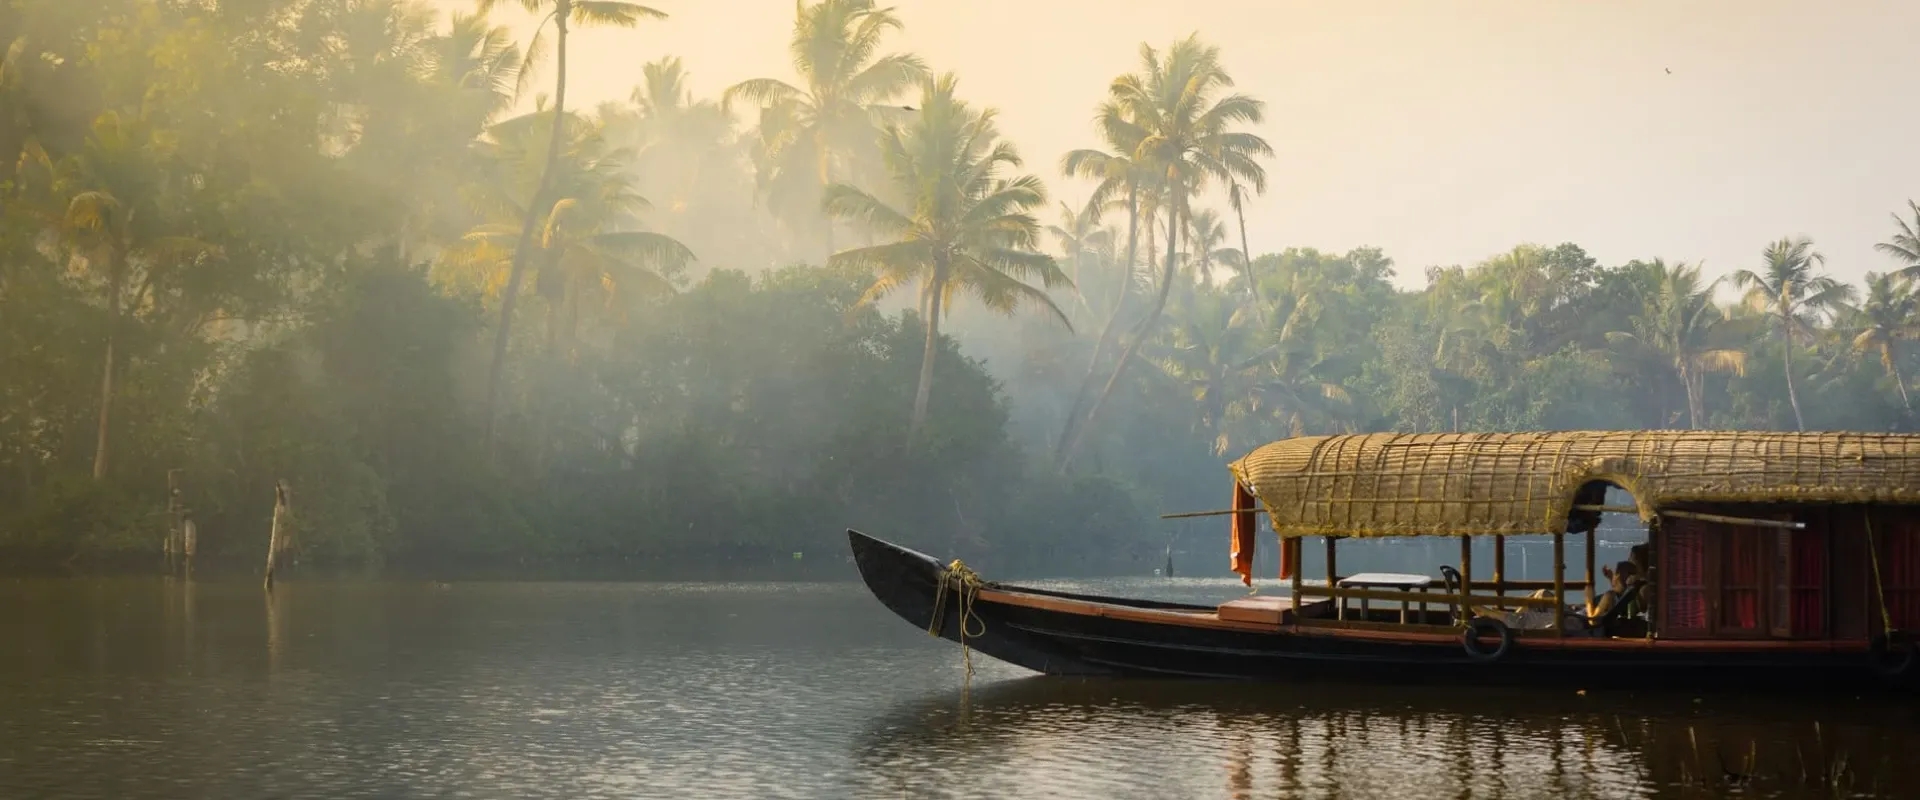 A boat floats in the backwaters of Kerala